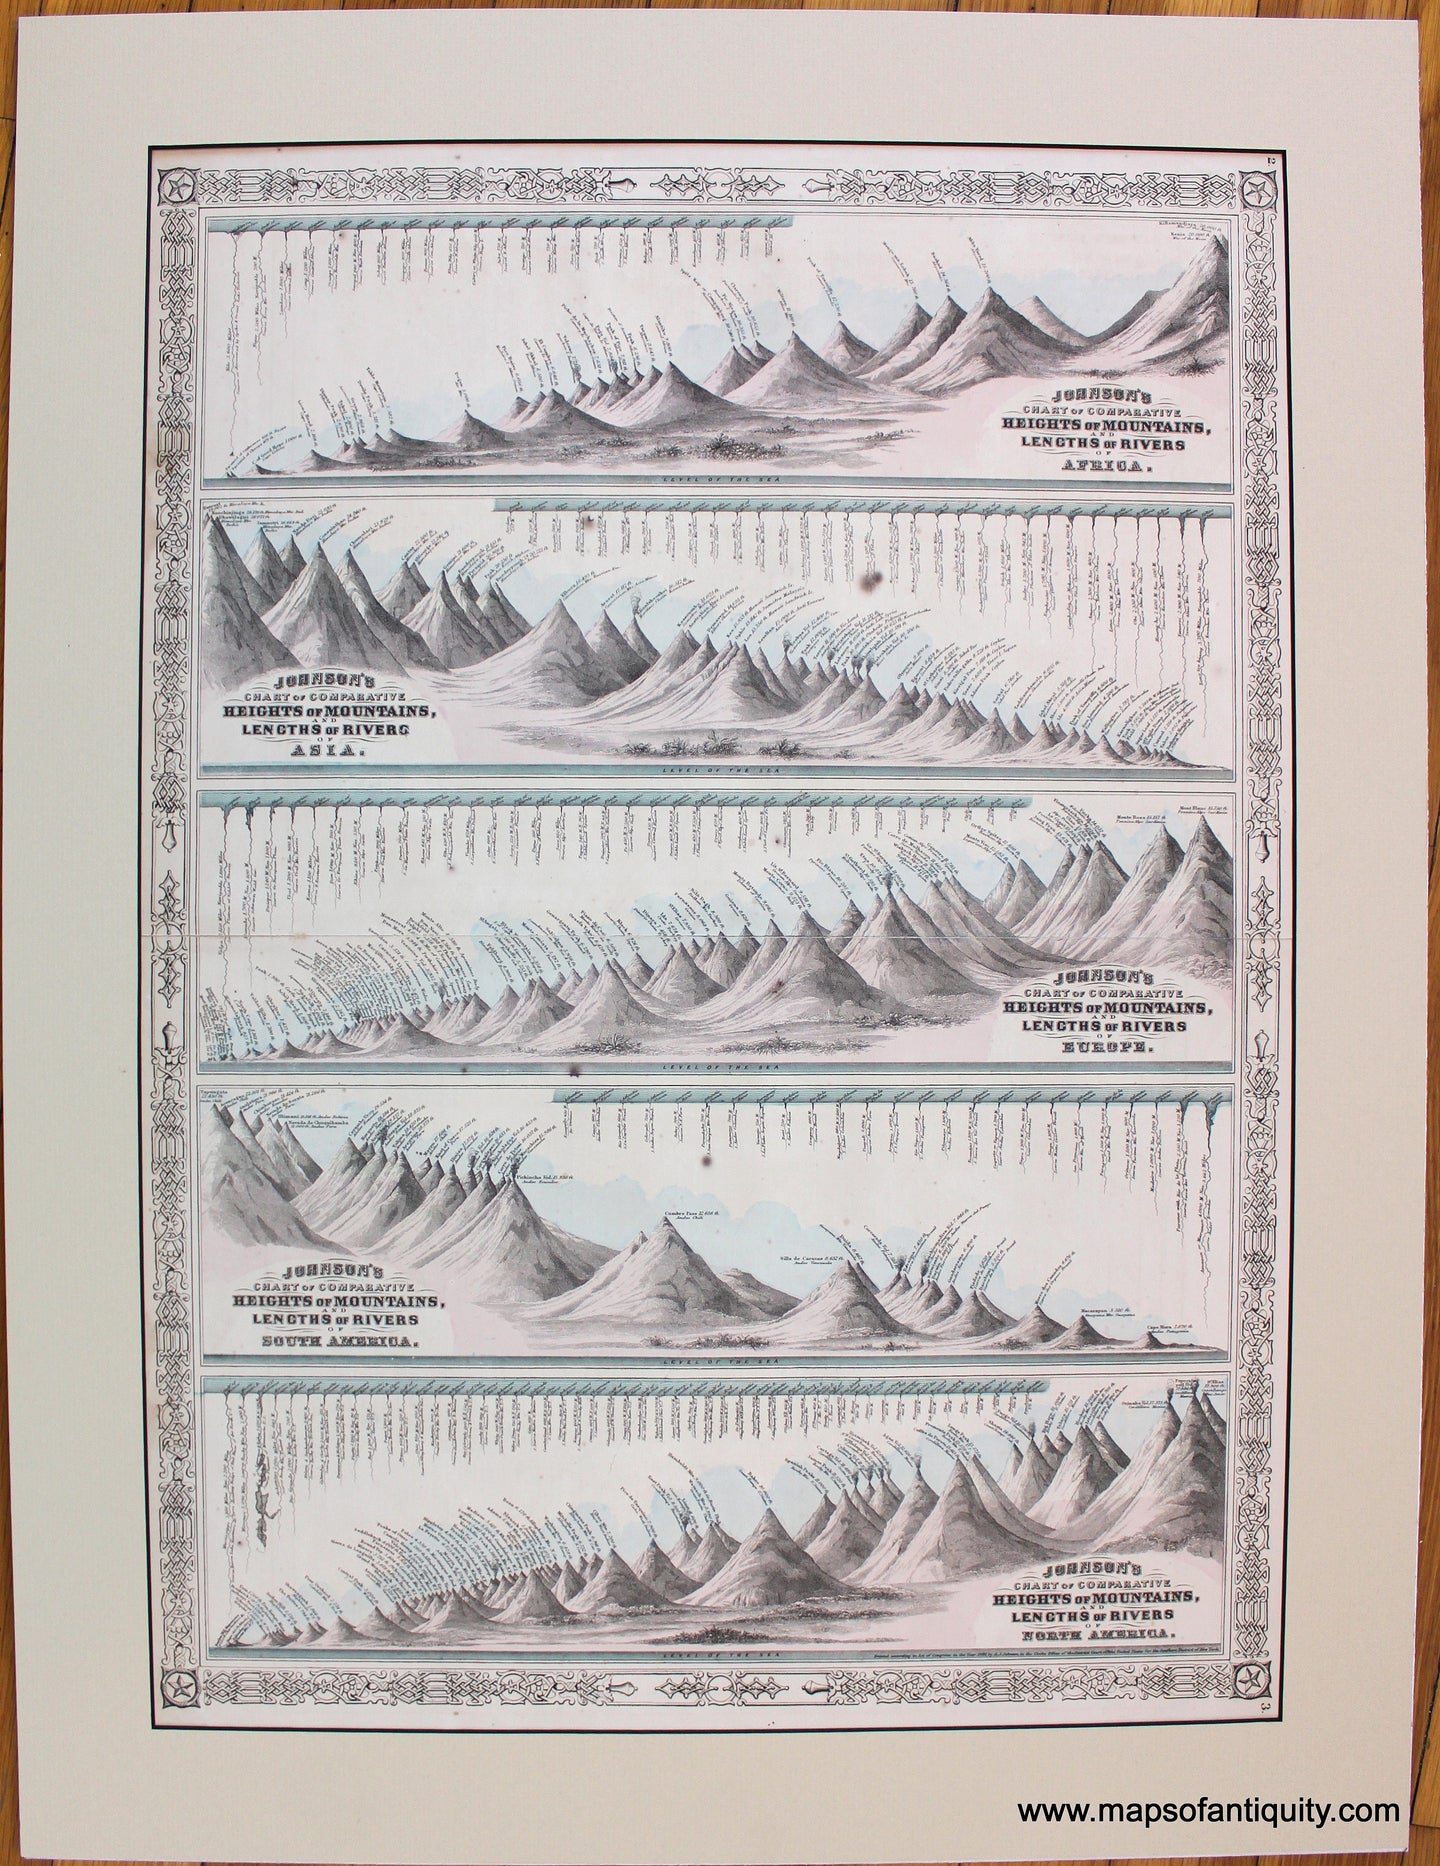 Antique-Map-Johnson's-Chart-of-Comparative-Heights-of-Mountains-and-Lengths-of-Rivers-of-North-America-South-America-Europe-Asia-and-Africa.-